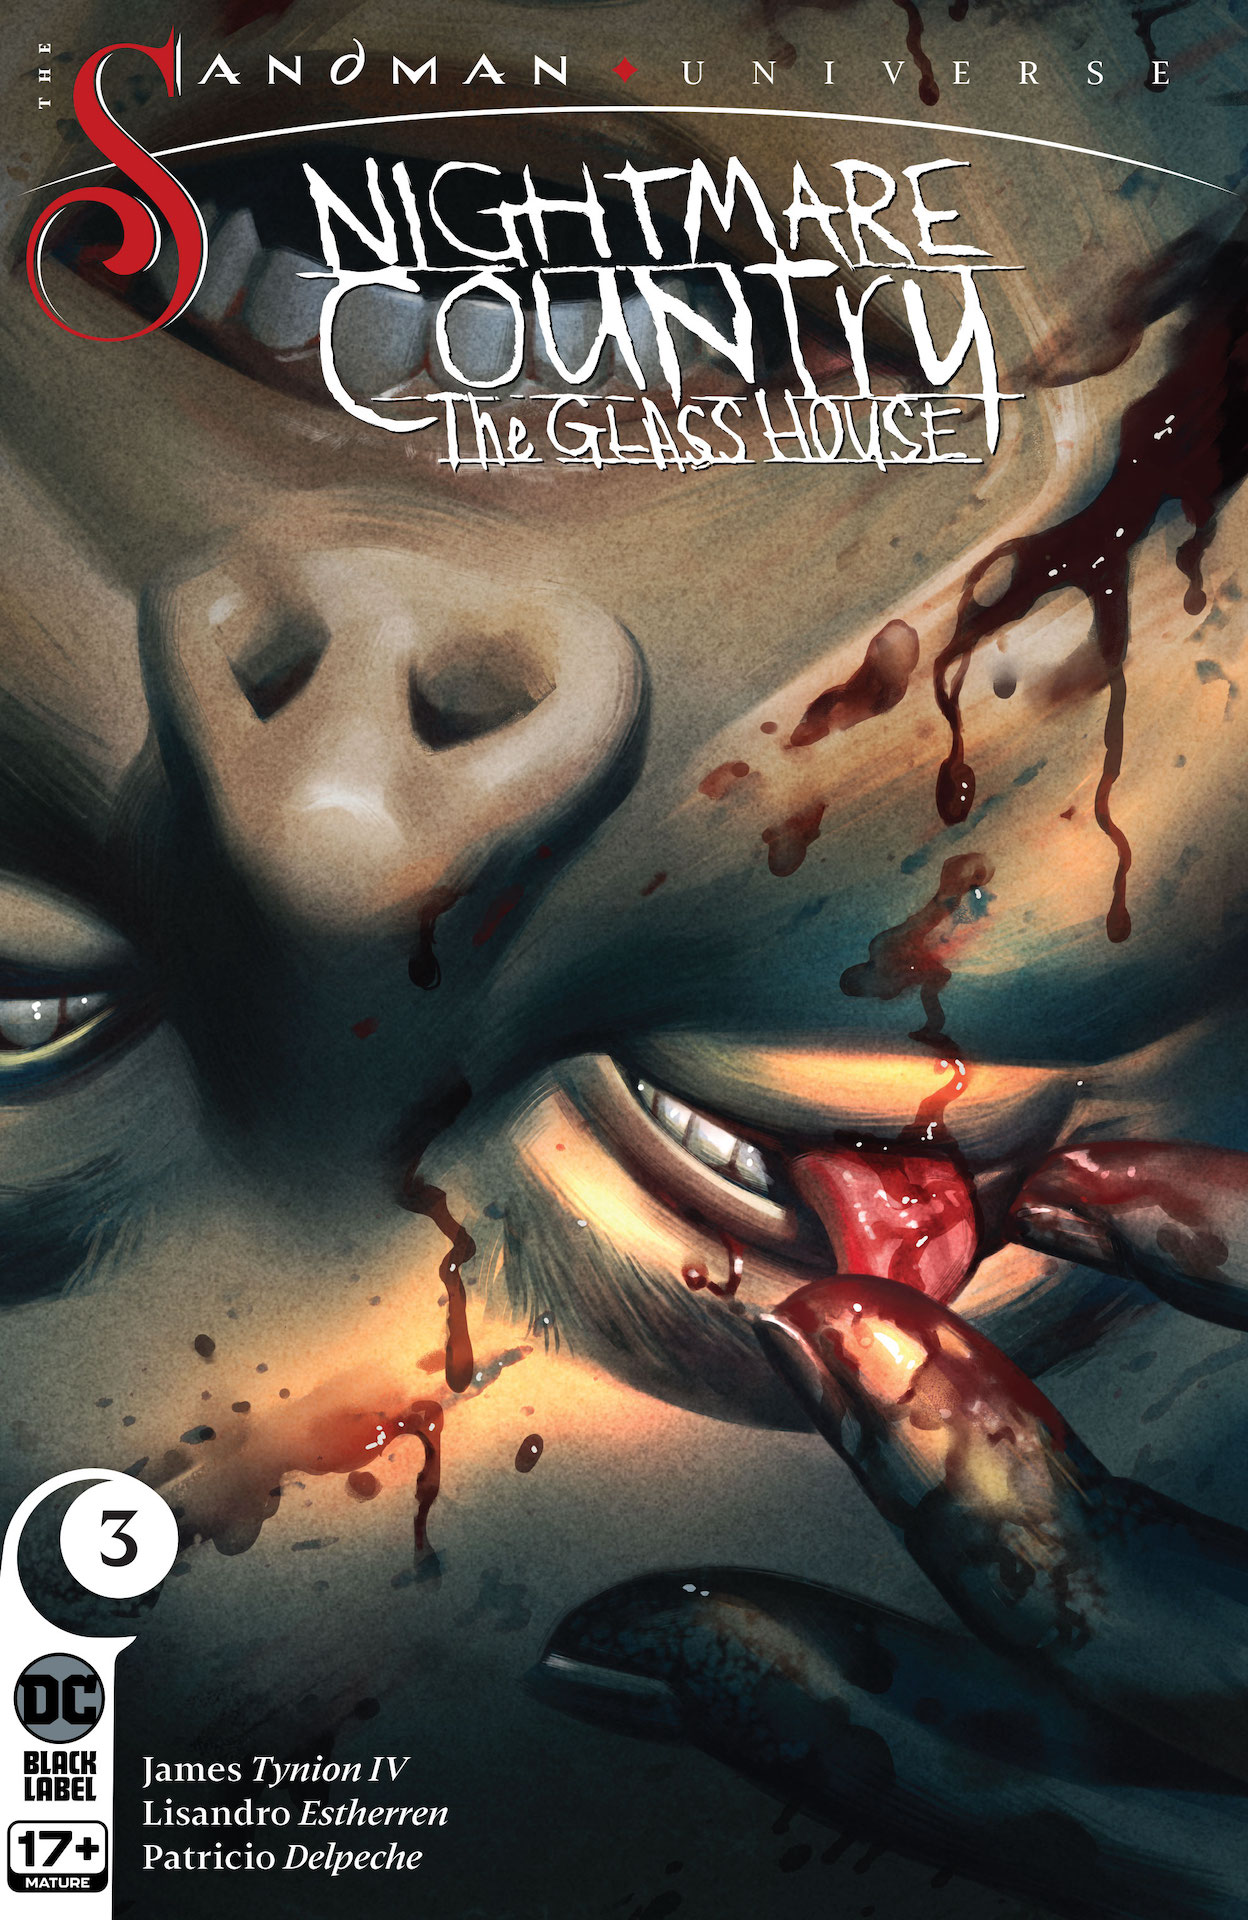 DC Preview: The Sandman Universe: Nightmare Country - The Glass House #3